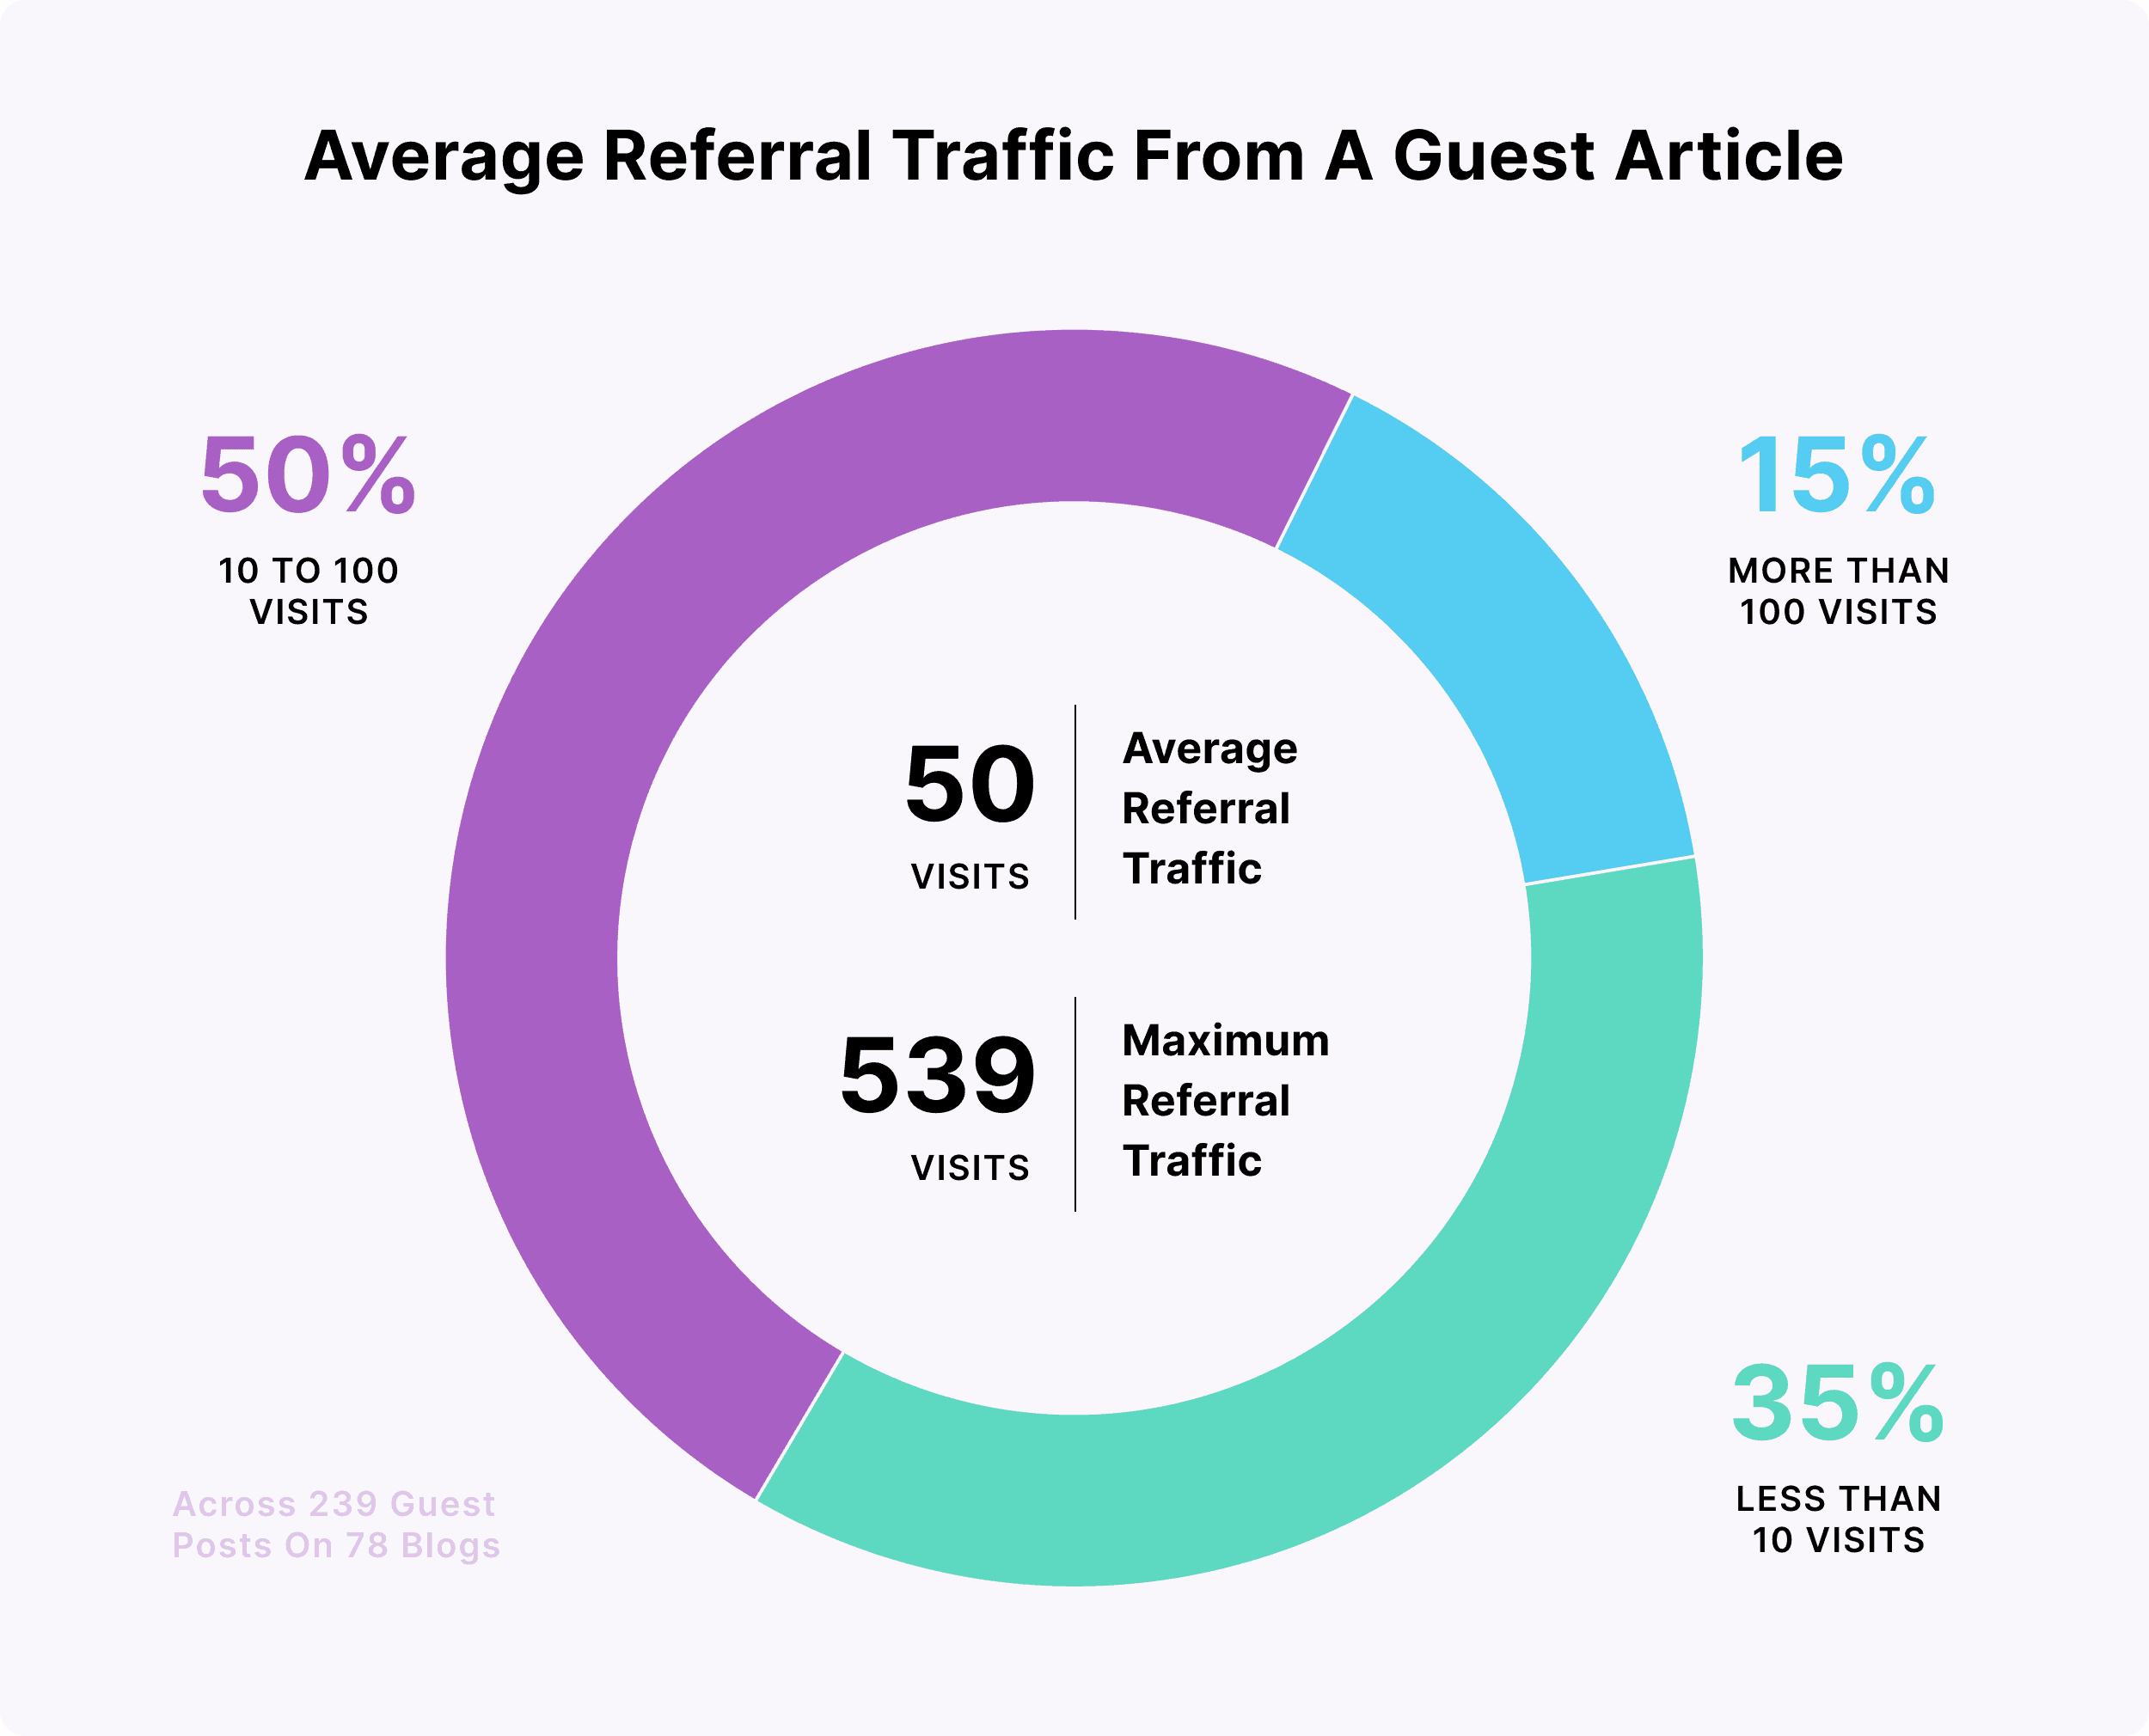 Average referral traffic from a guest article